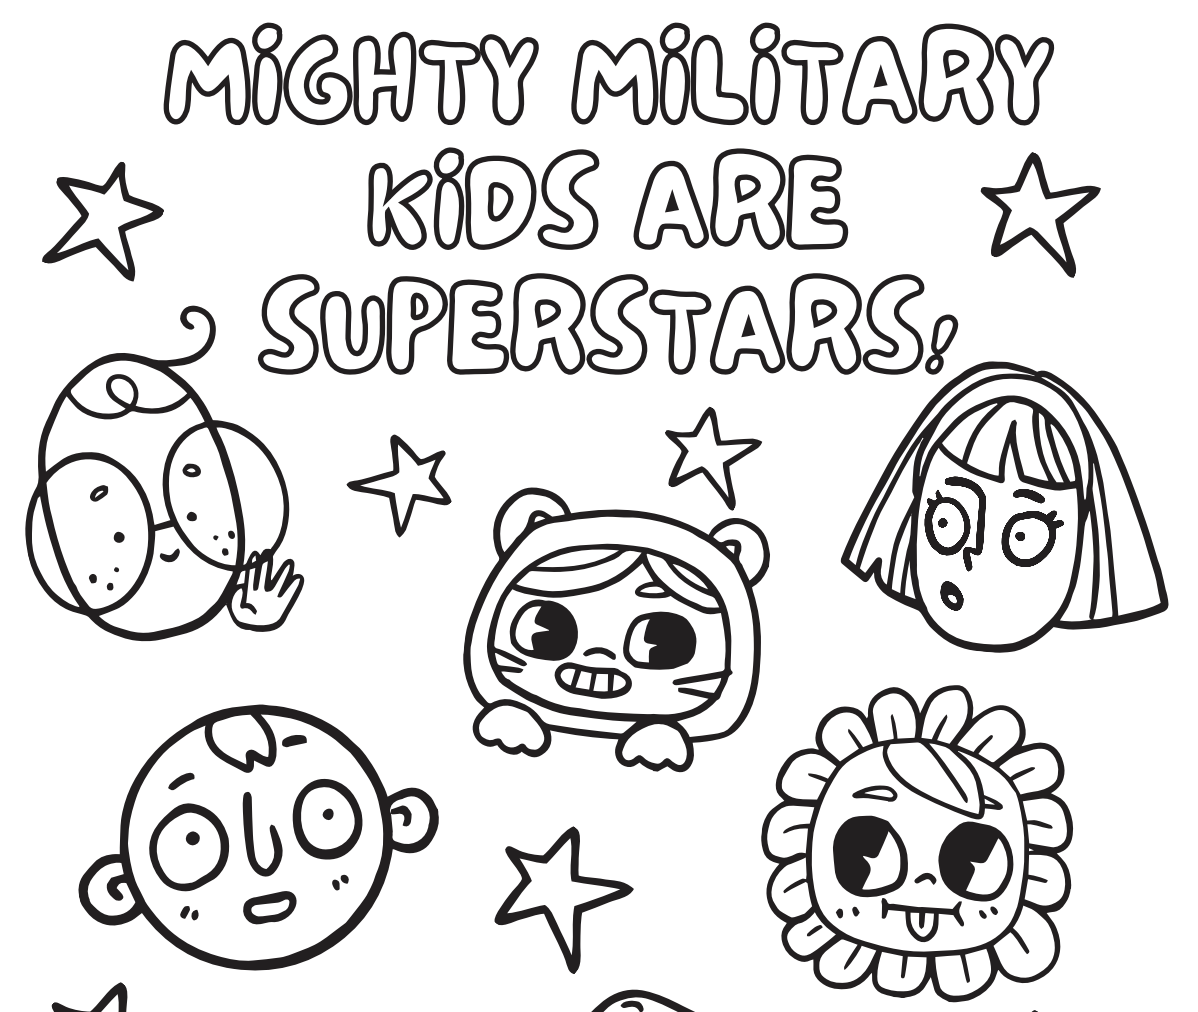 Looking for a fun activity to do with your military kiddo? Check out these fun coloring sheets from our friends at @CohenVeterans! 💜👇 cvn.wpenginepowered.com/wp-content/upl…